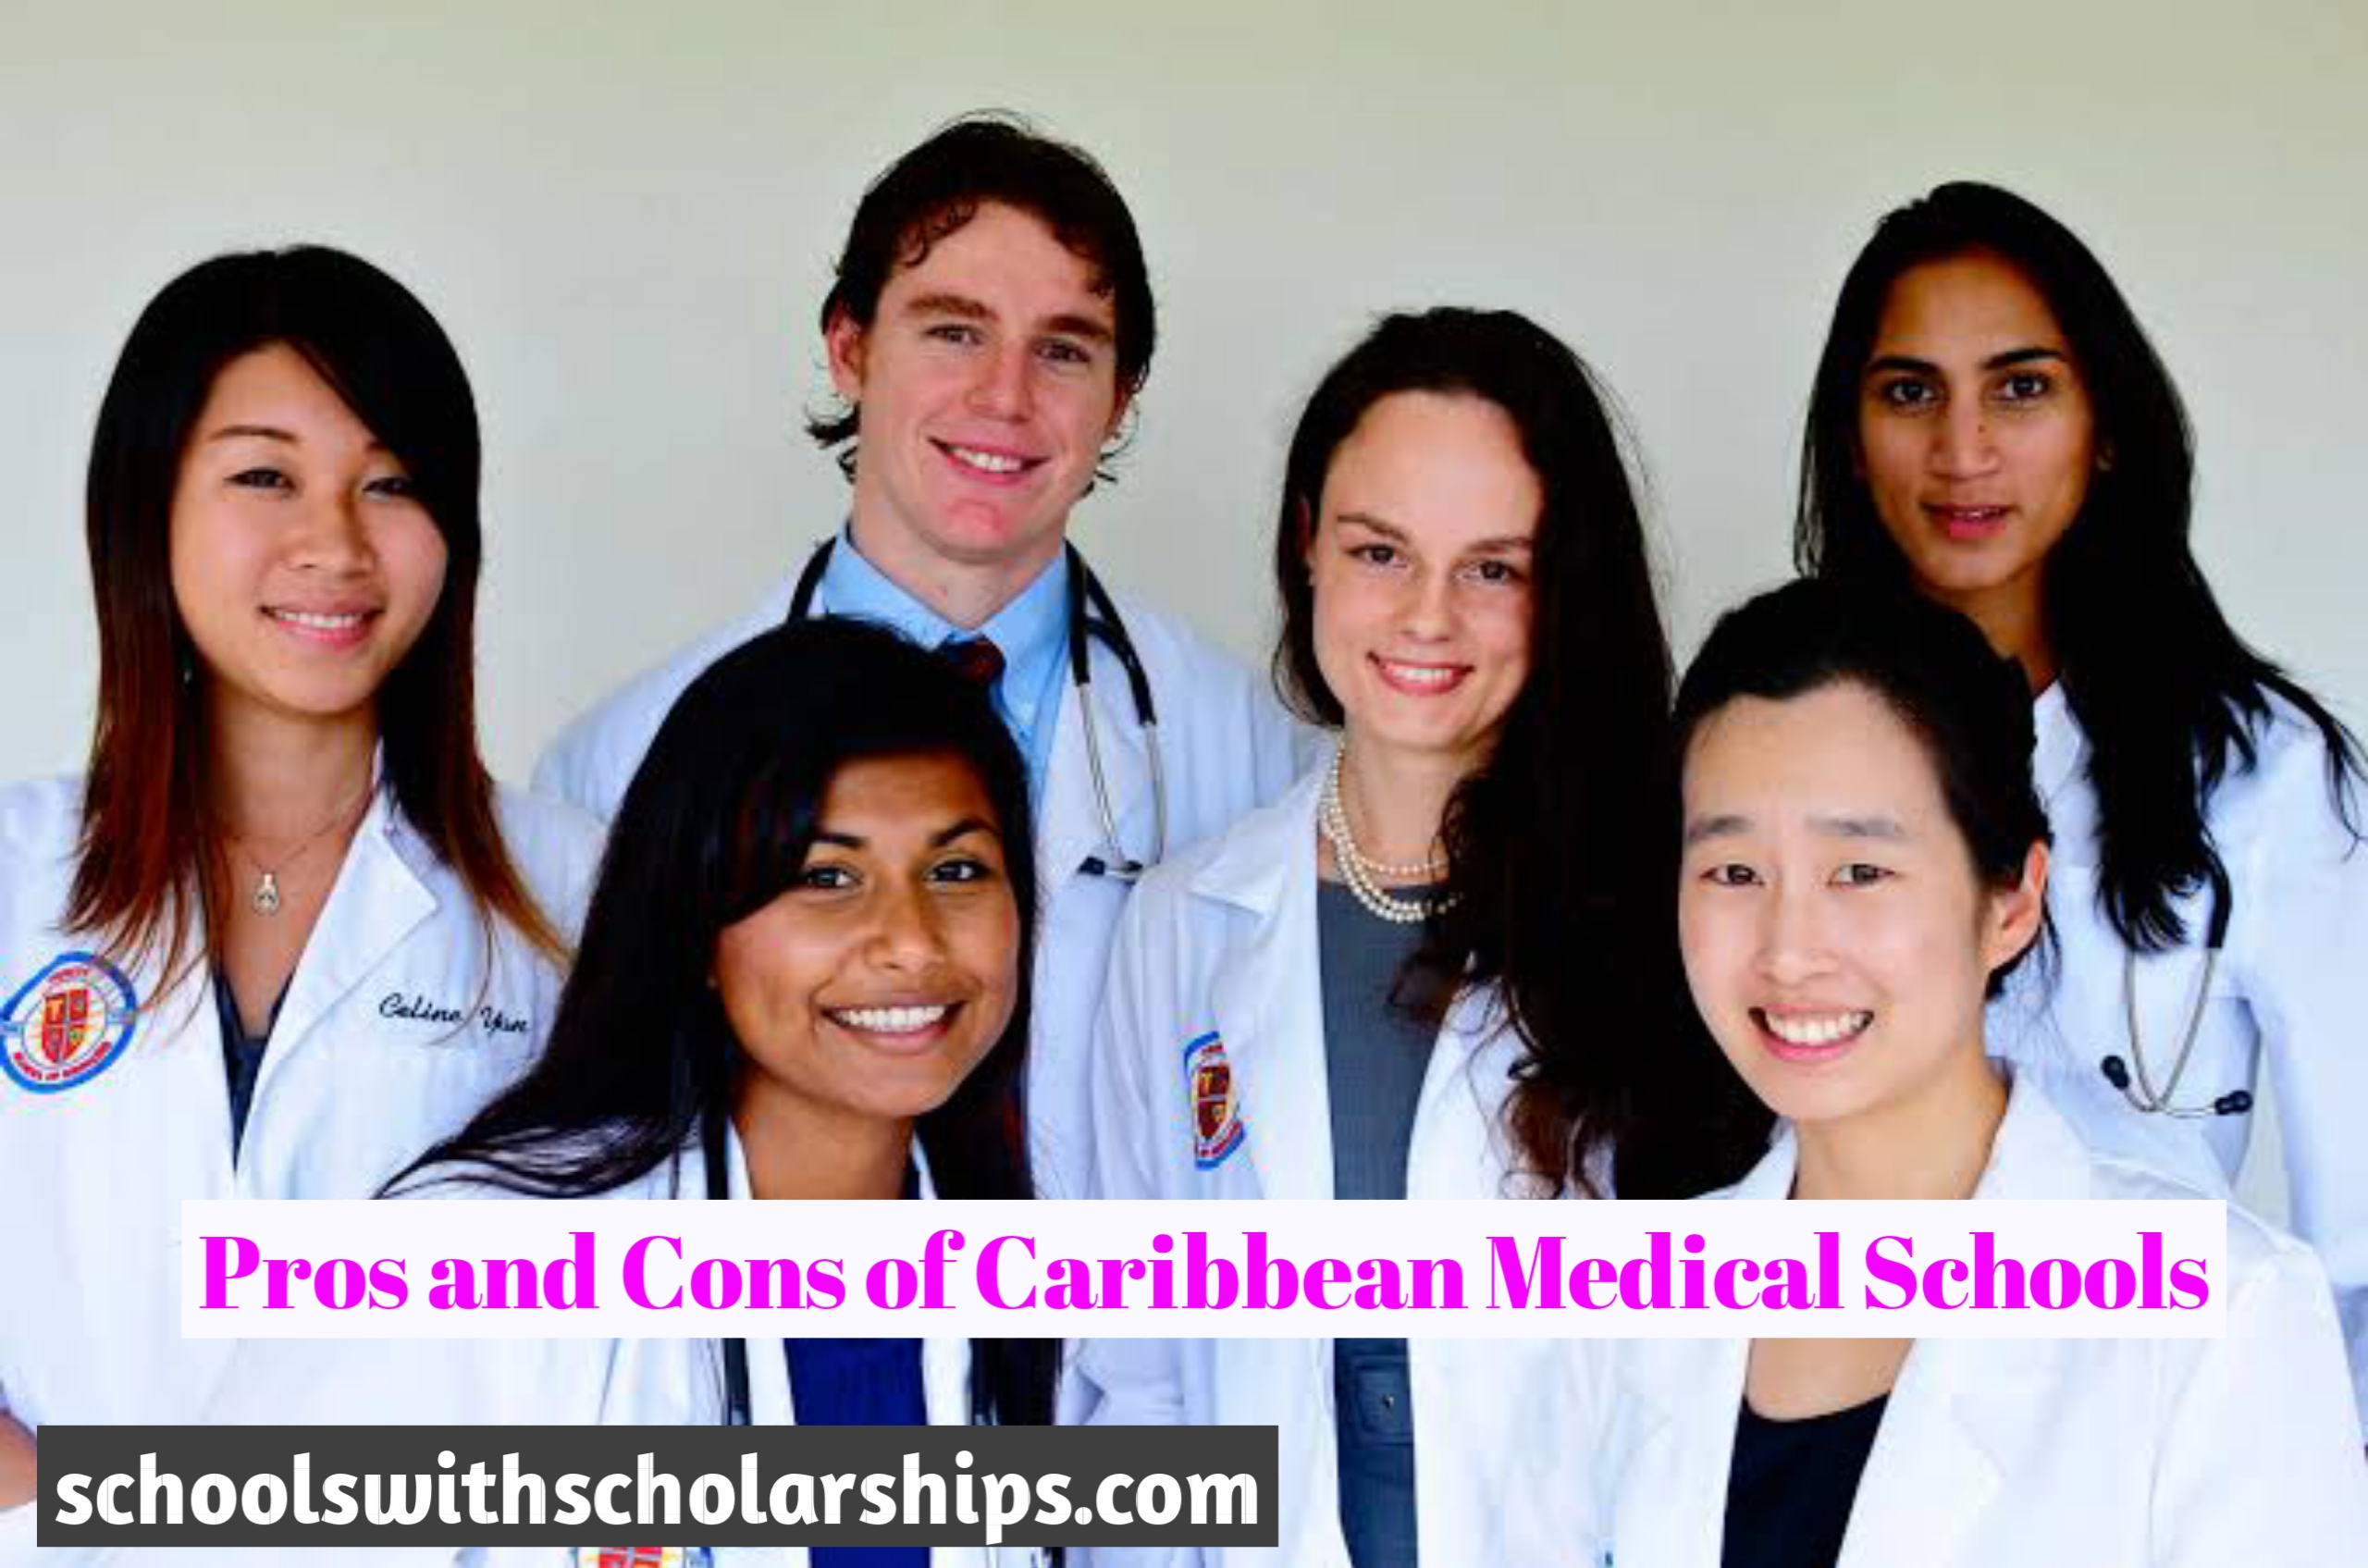 Pros and Cons of Caribbean Medical Schools